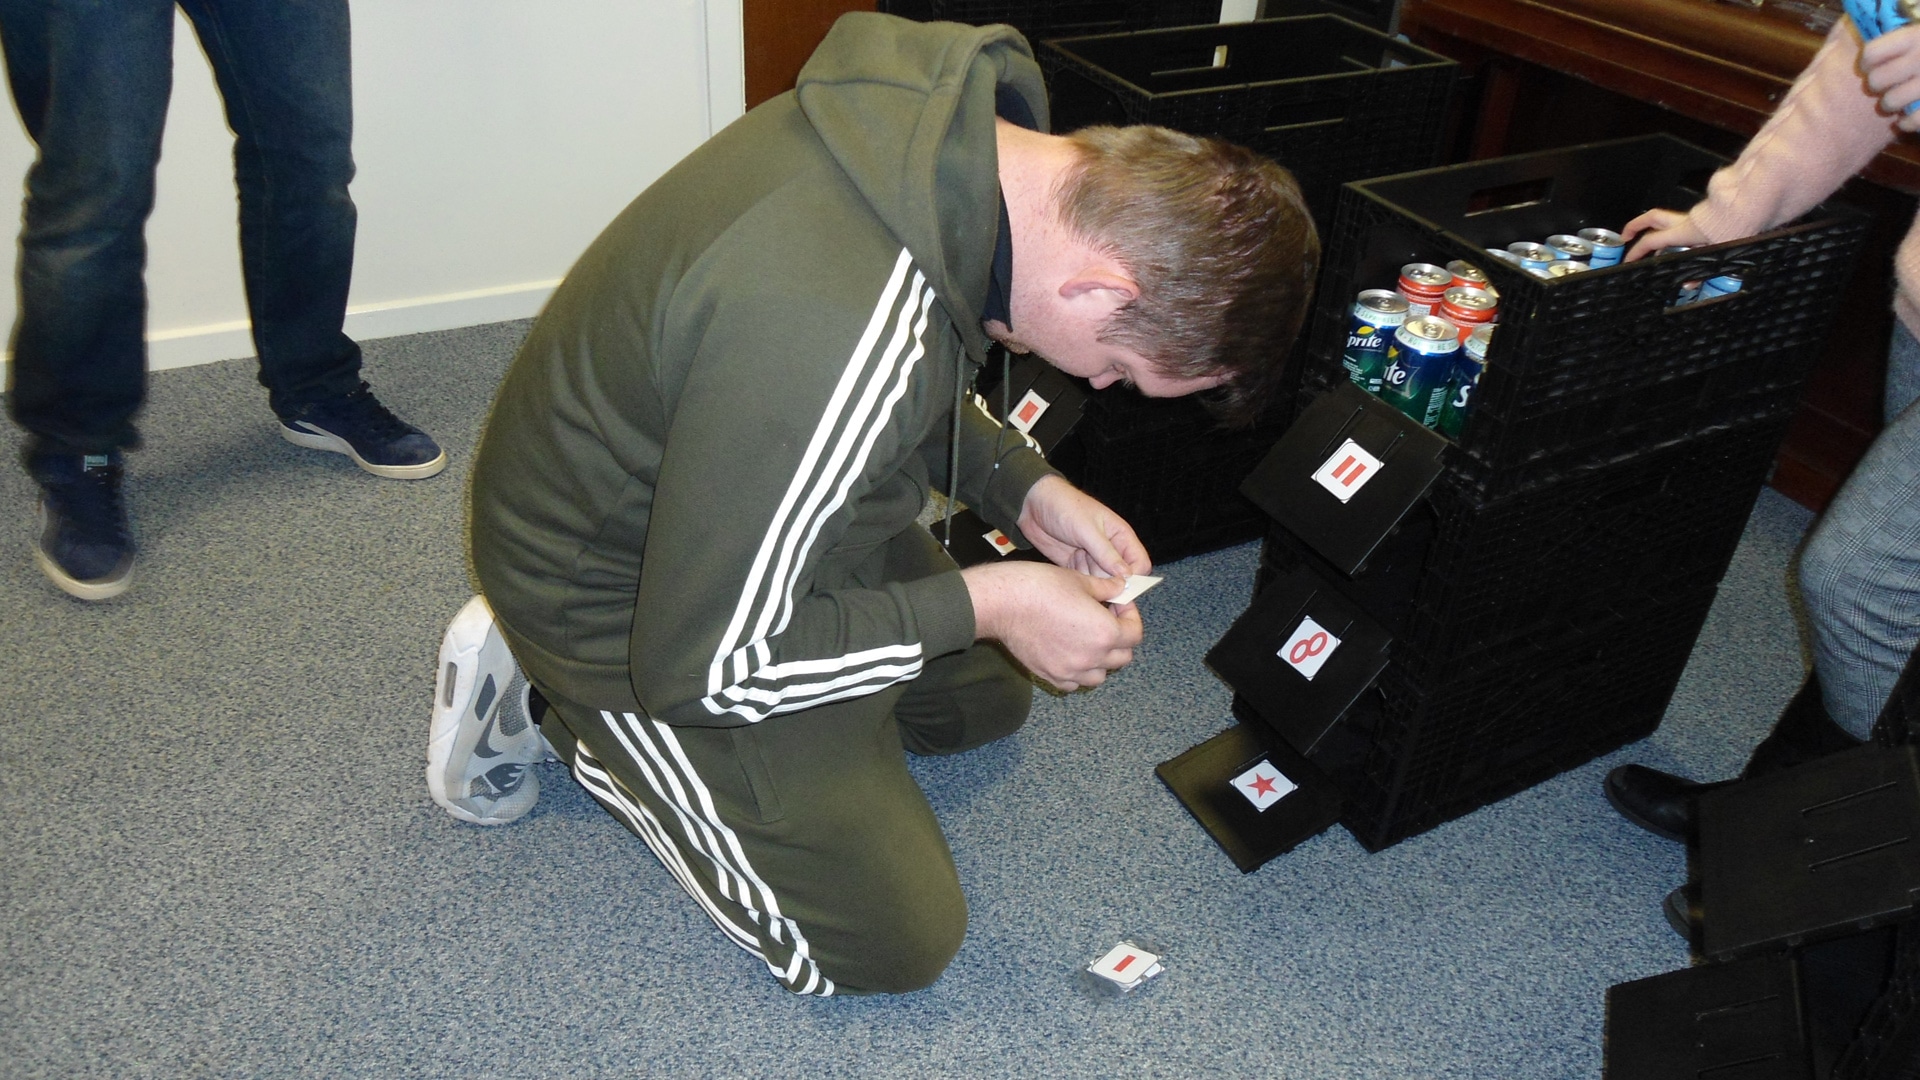 Magpies member looking at labels on crates of fizzy drinks